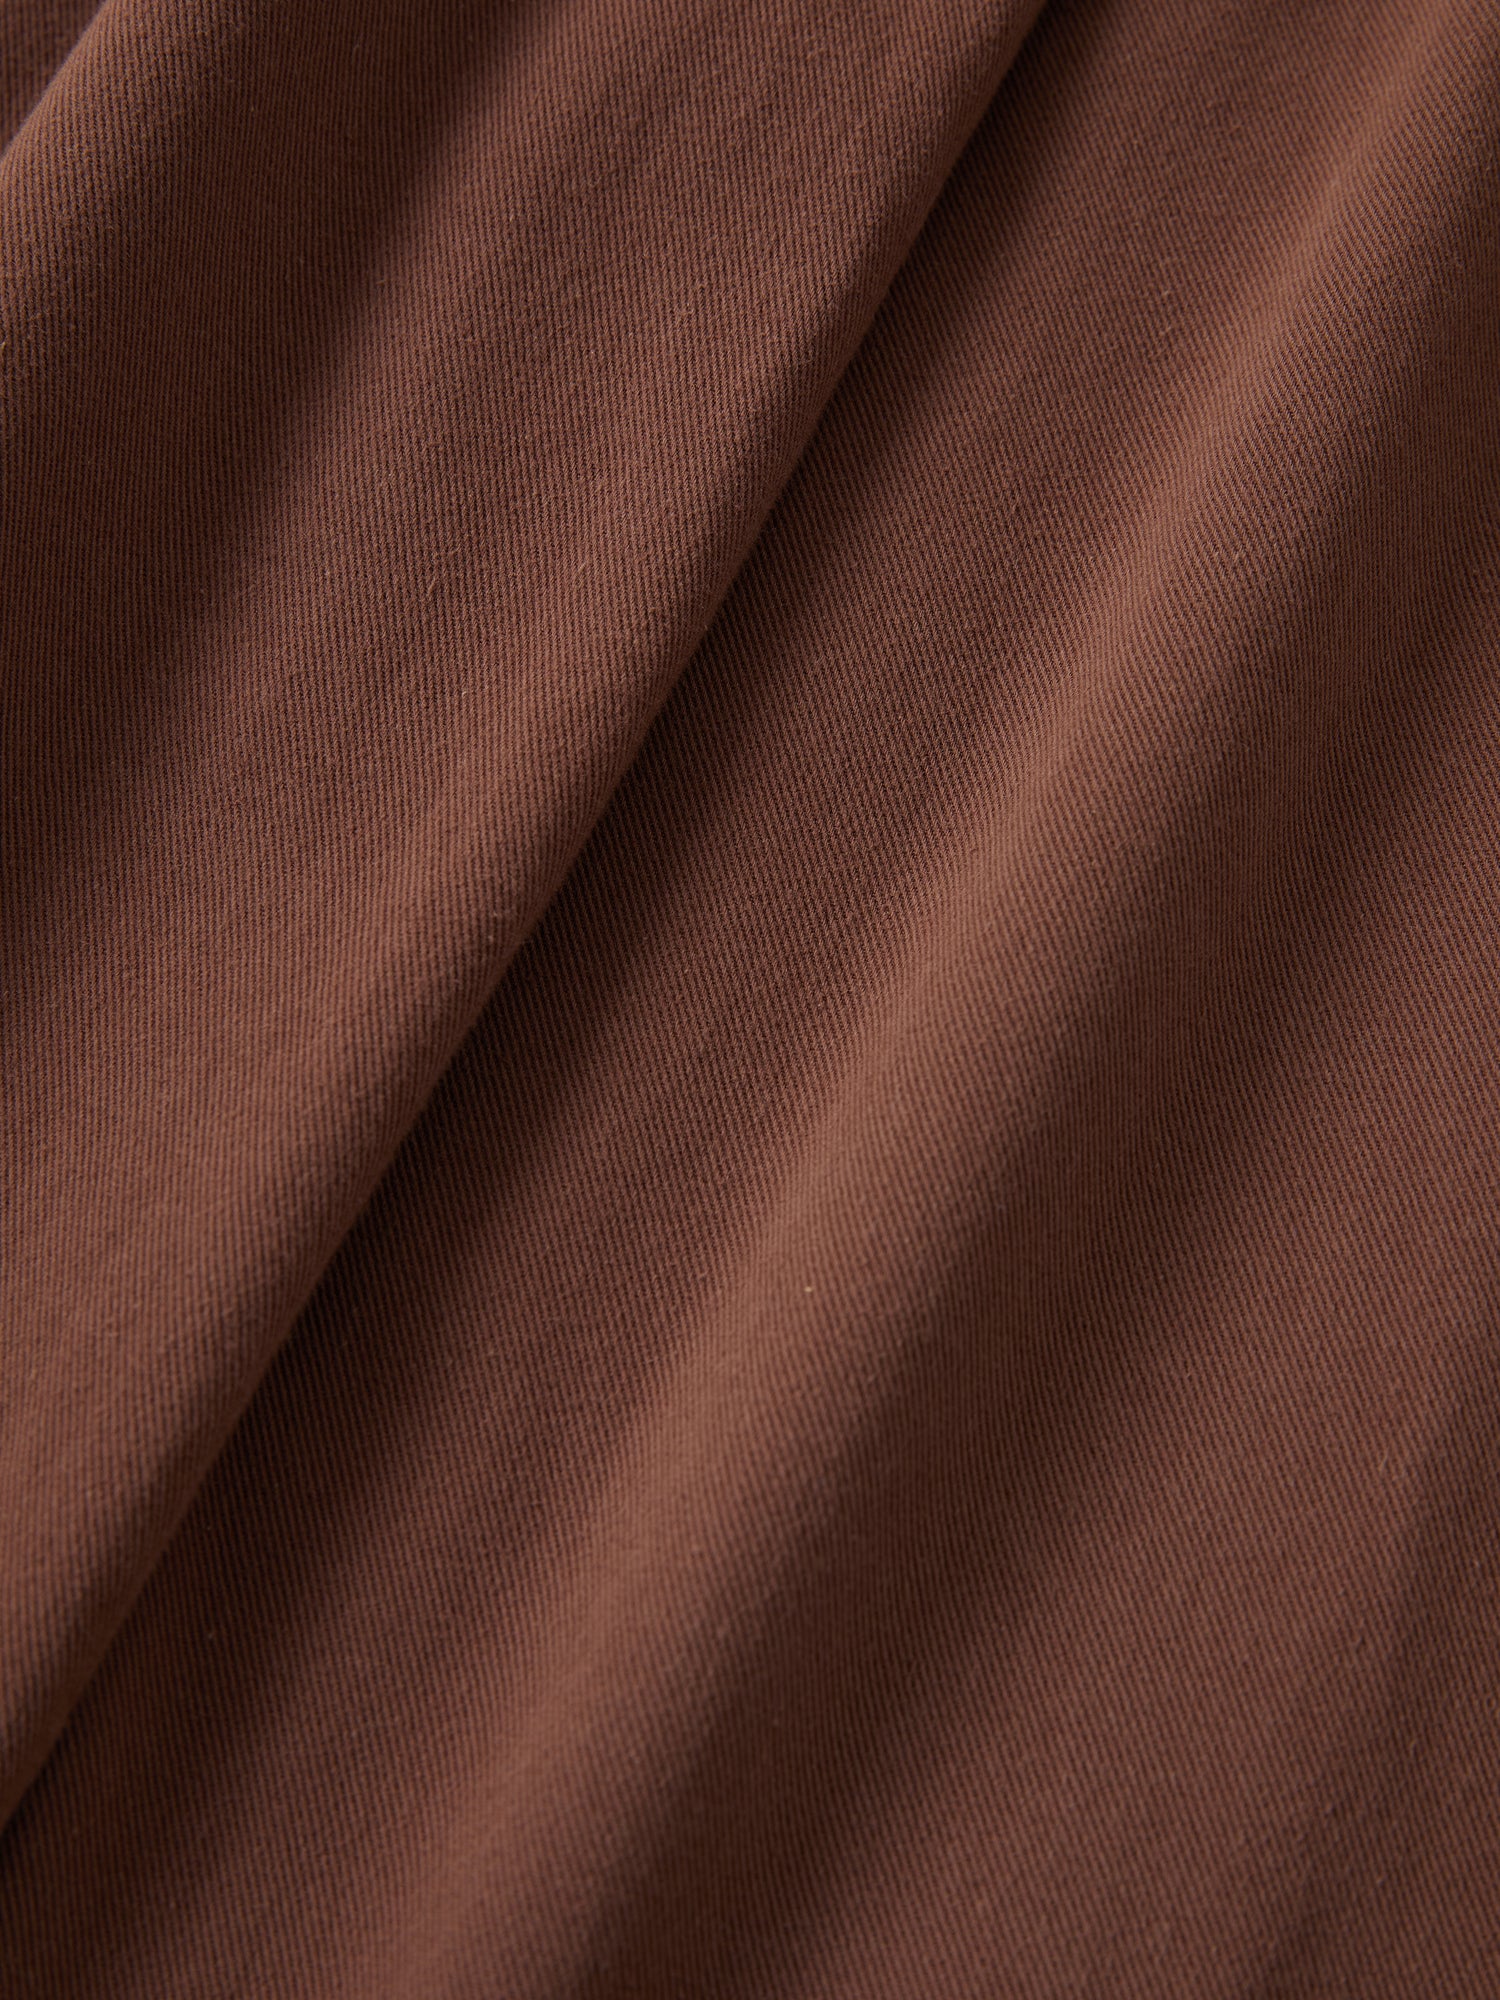 A close up of a Dusky Western Cargo Jeans fabric by Found.